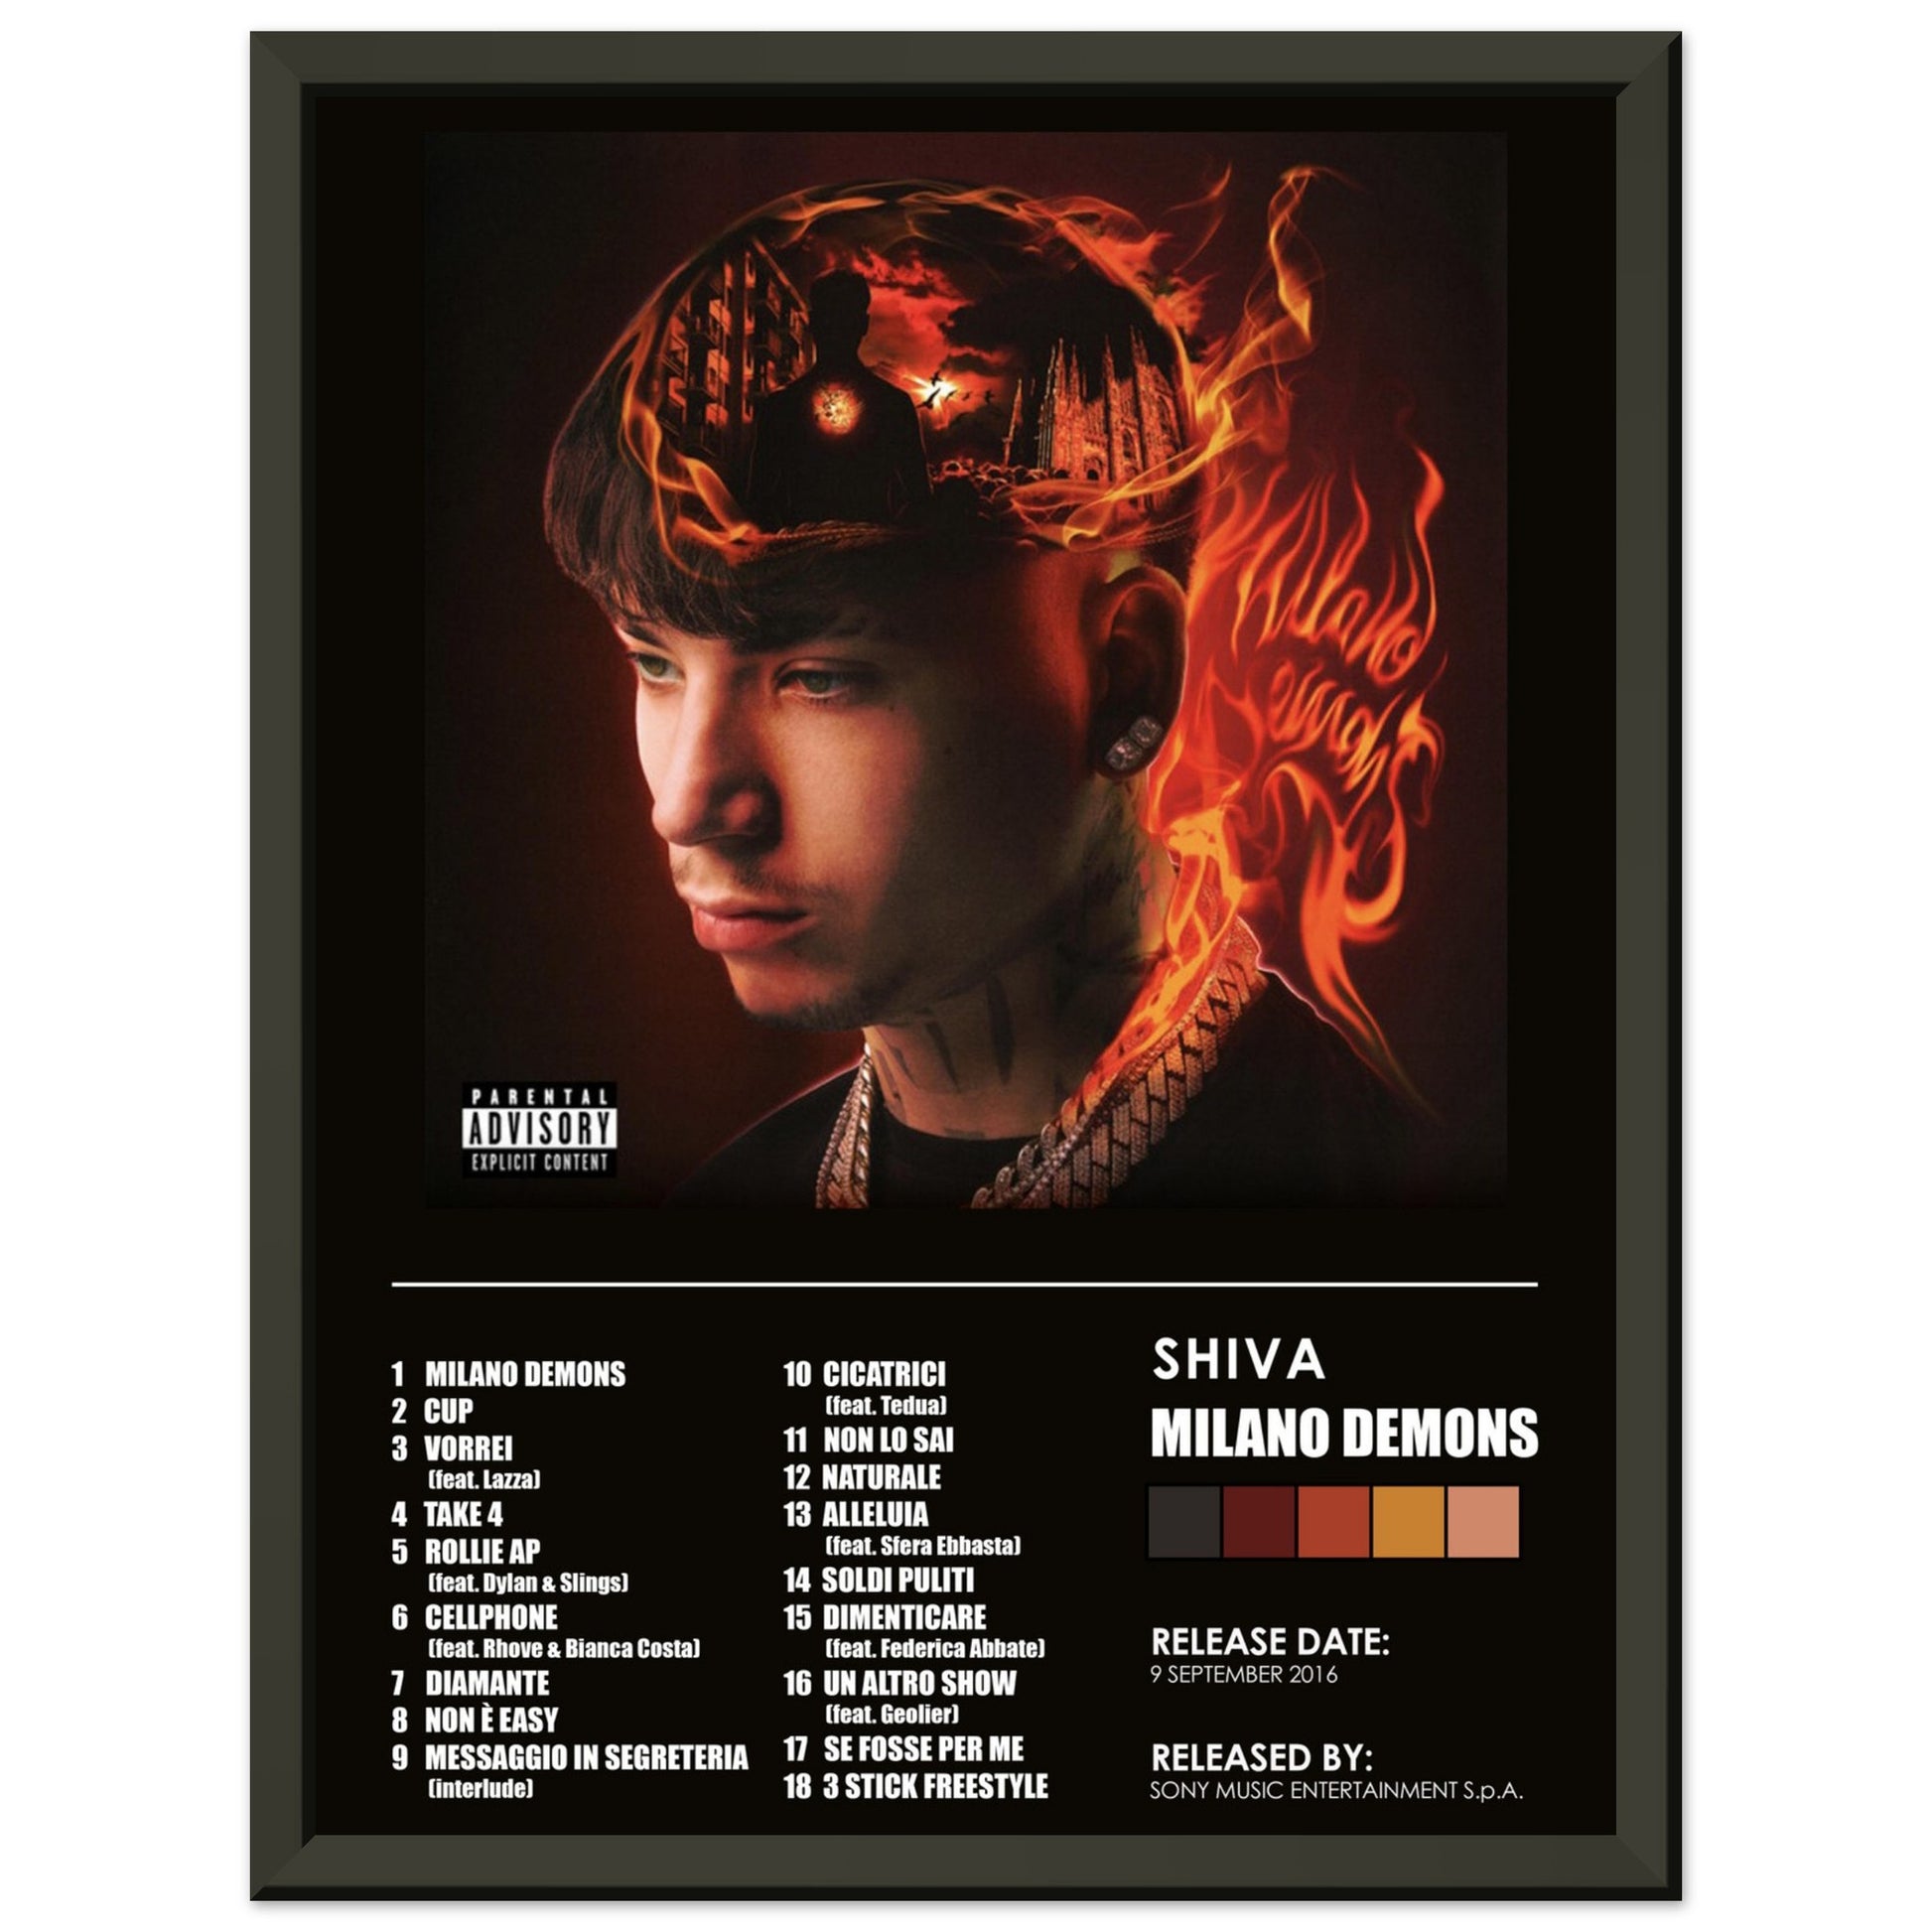 Milano Demons by Shiva - Reviews & Ratings on Musicboard